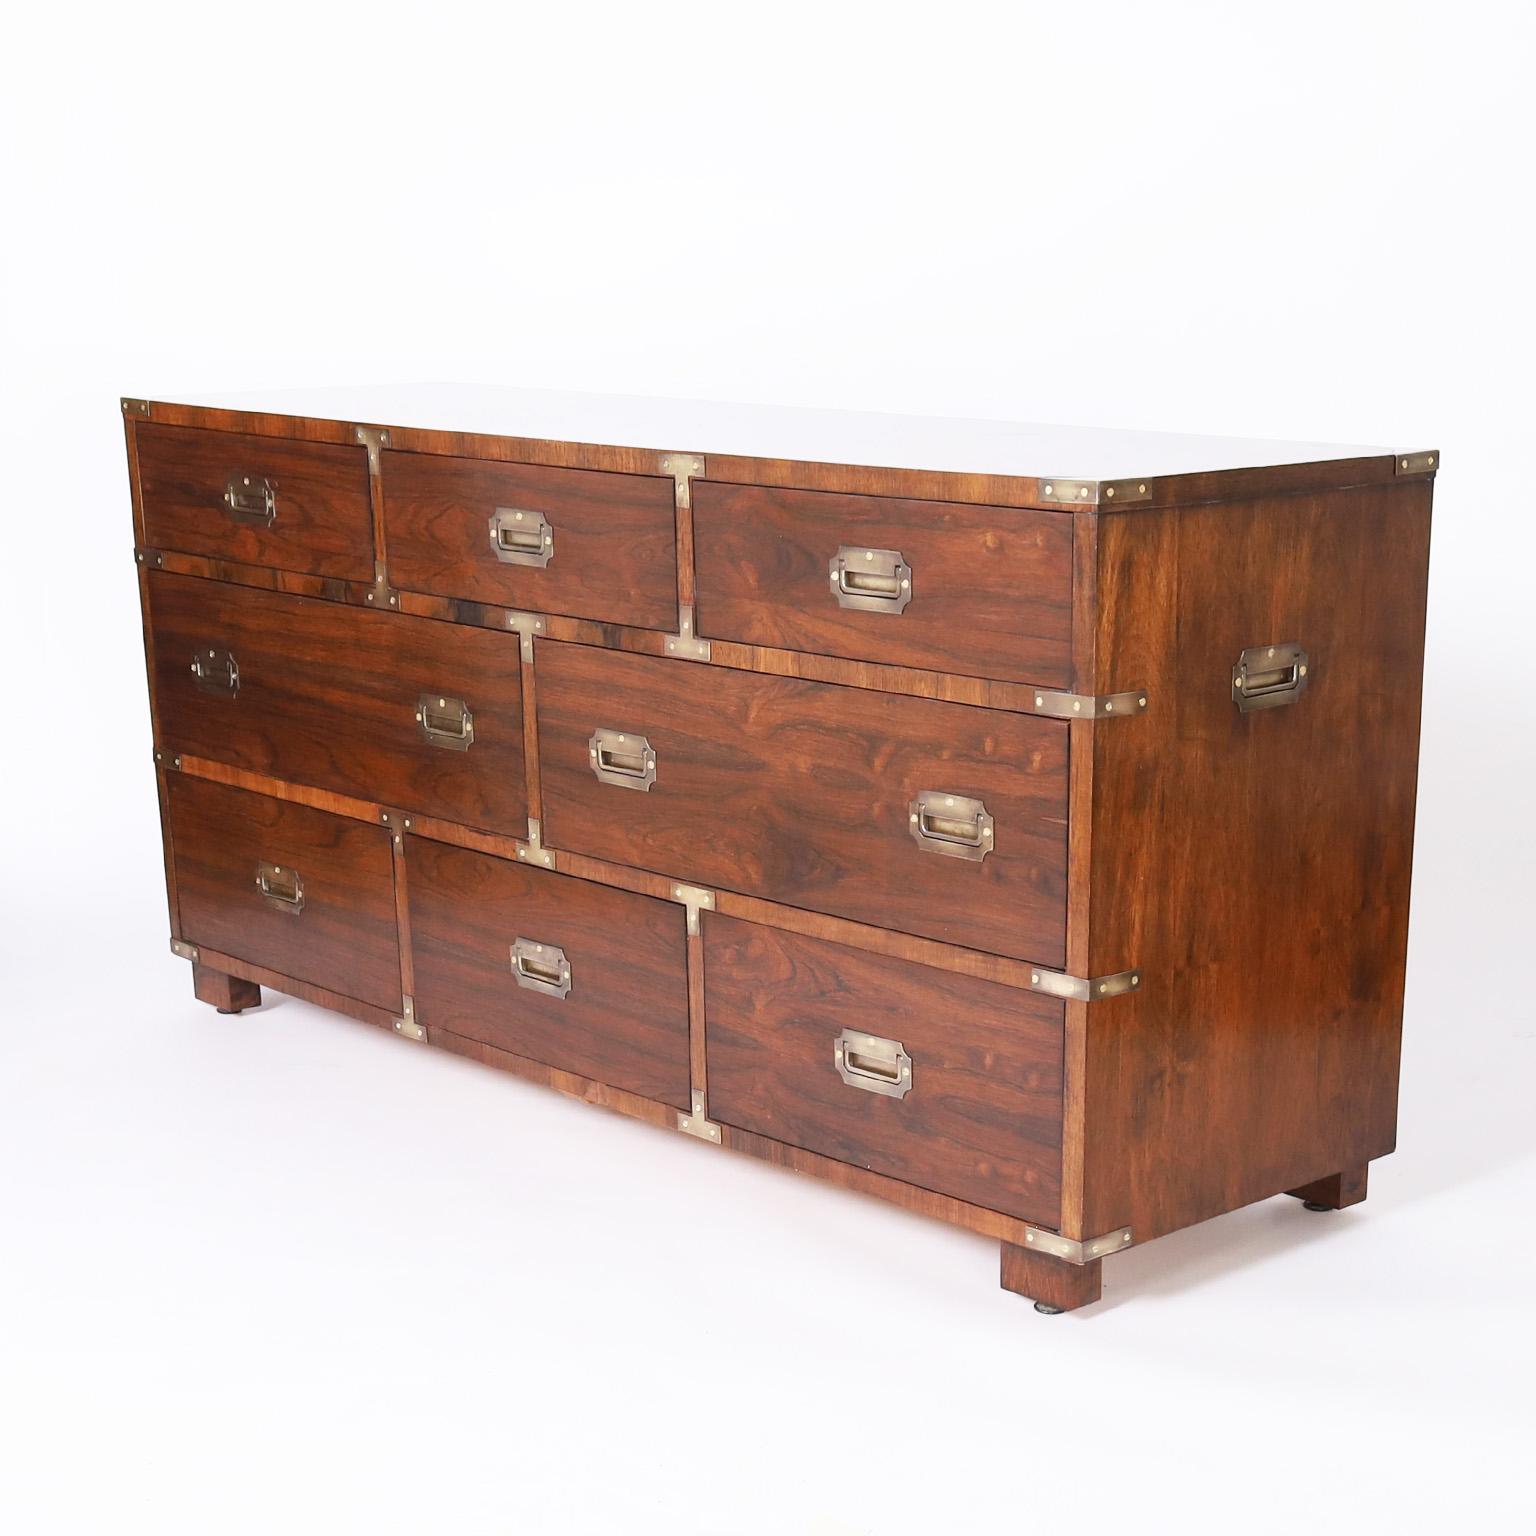 American Campaign Style Chest of Drawers or Dresser